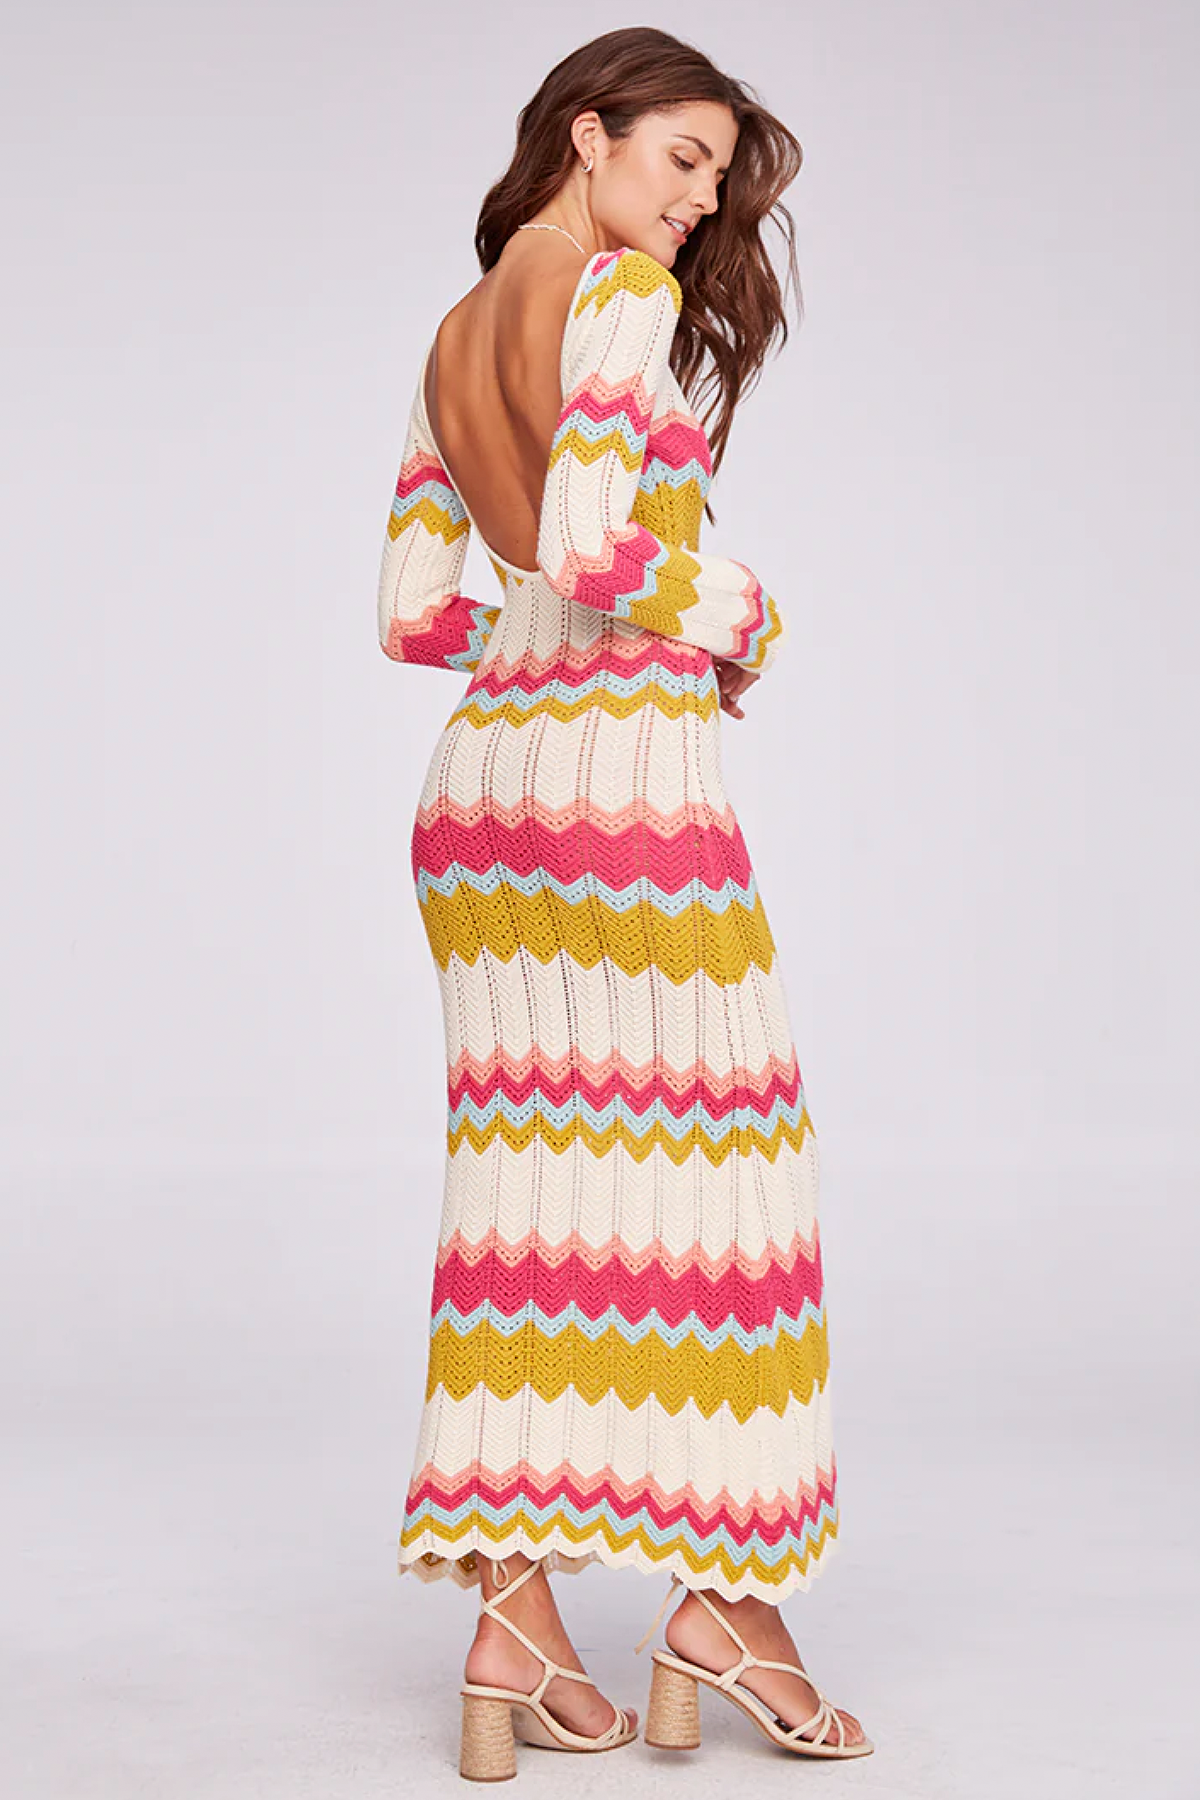 Capittana Piper Multicolor Knitted Dress